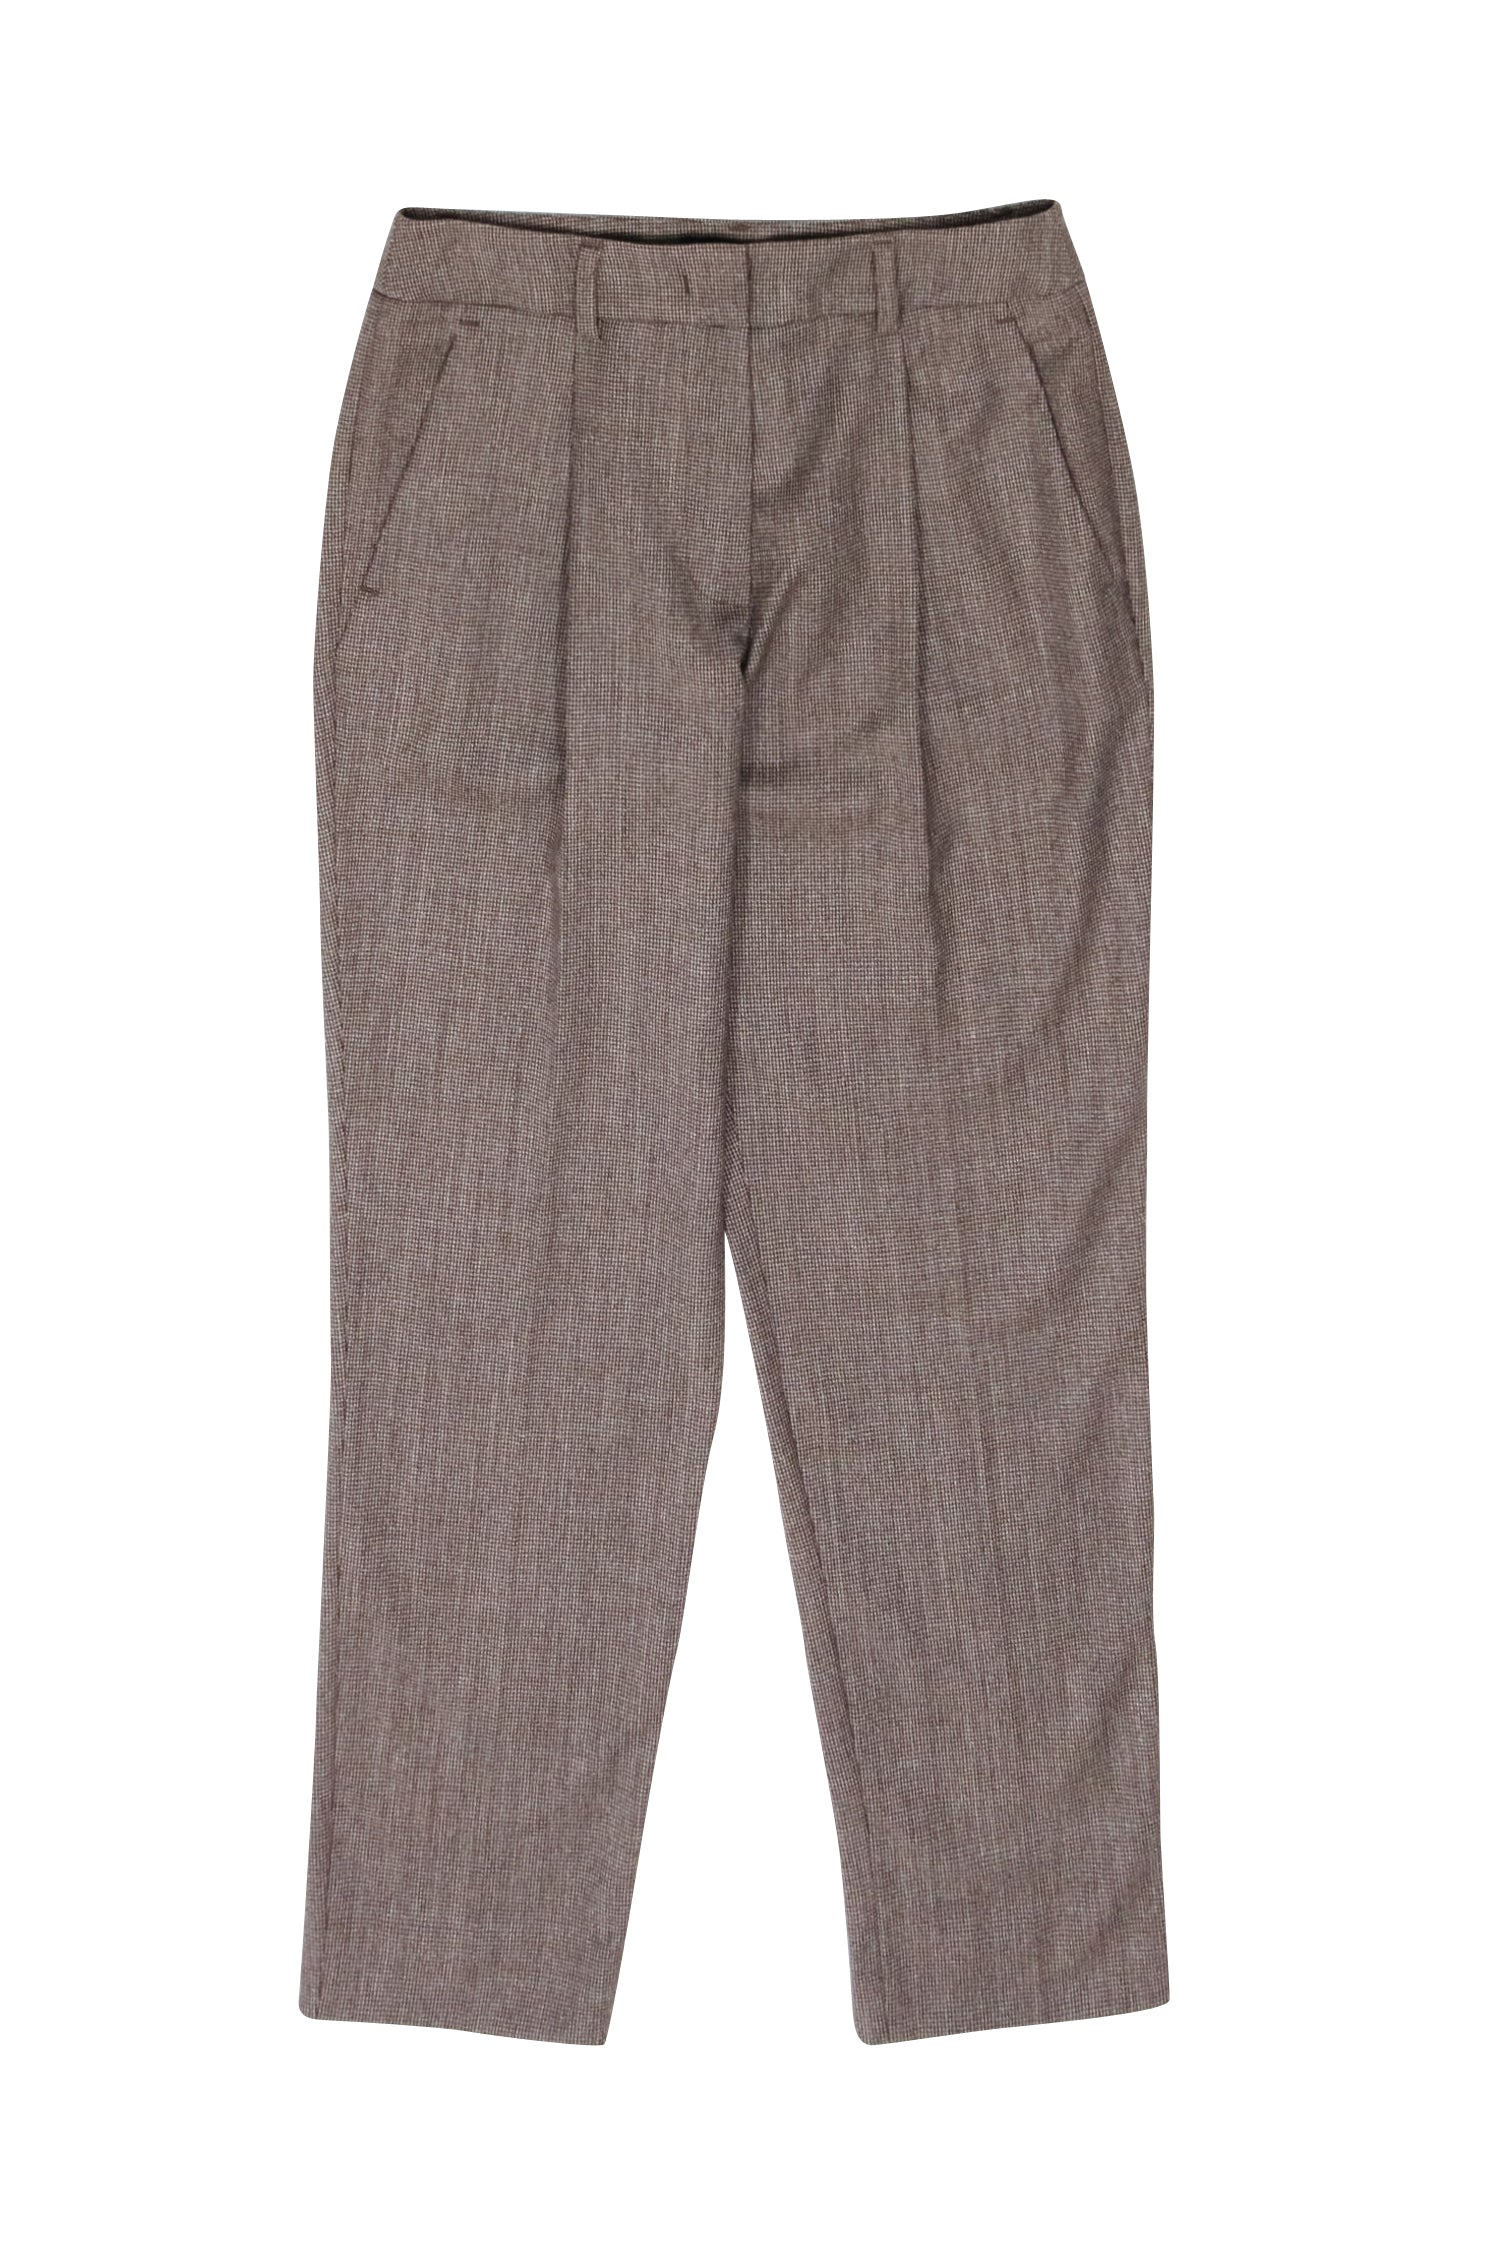 Weekend Max Mara - Brown Hounds-Tooth Pleated Waist Pant Sz 4